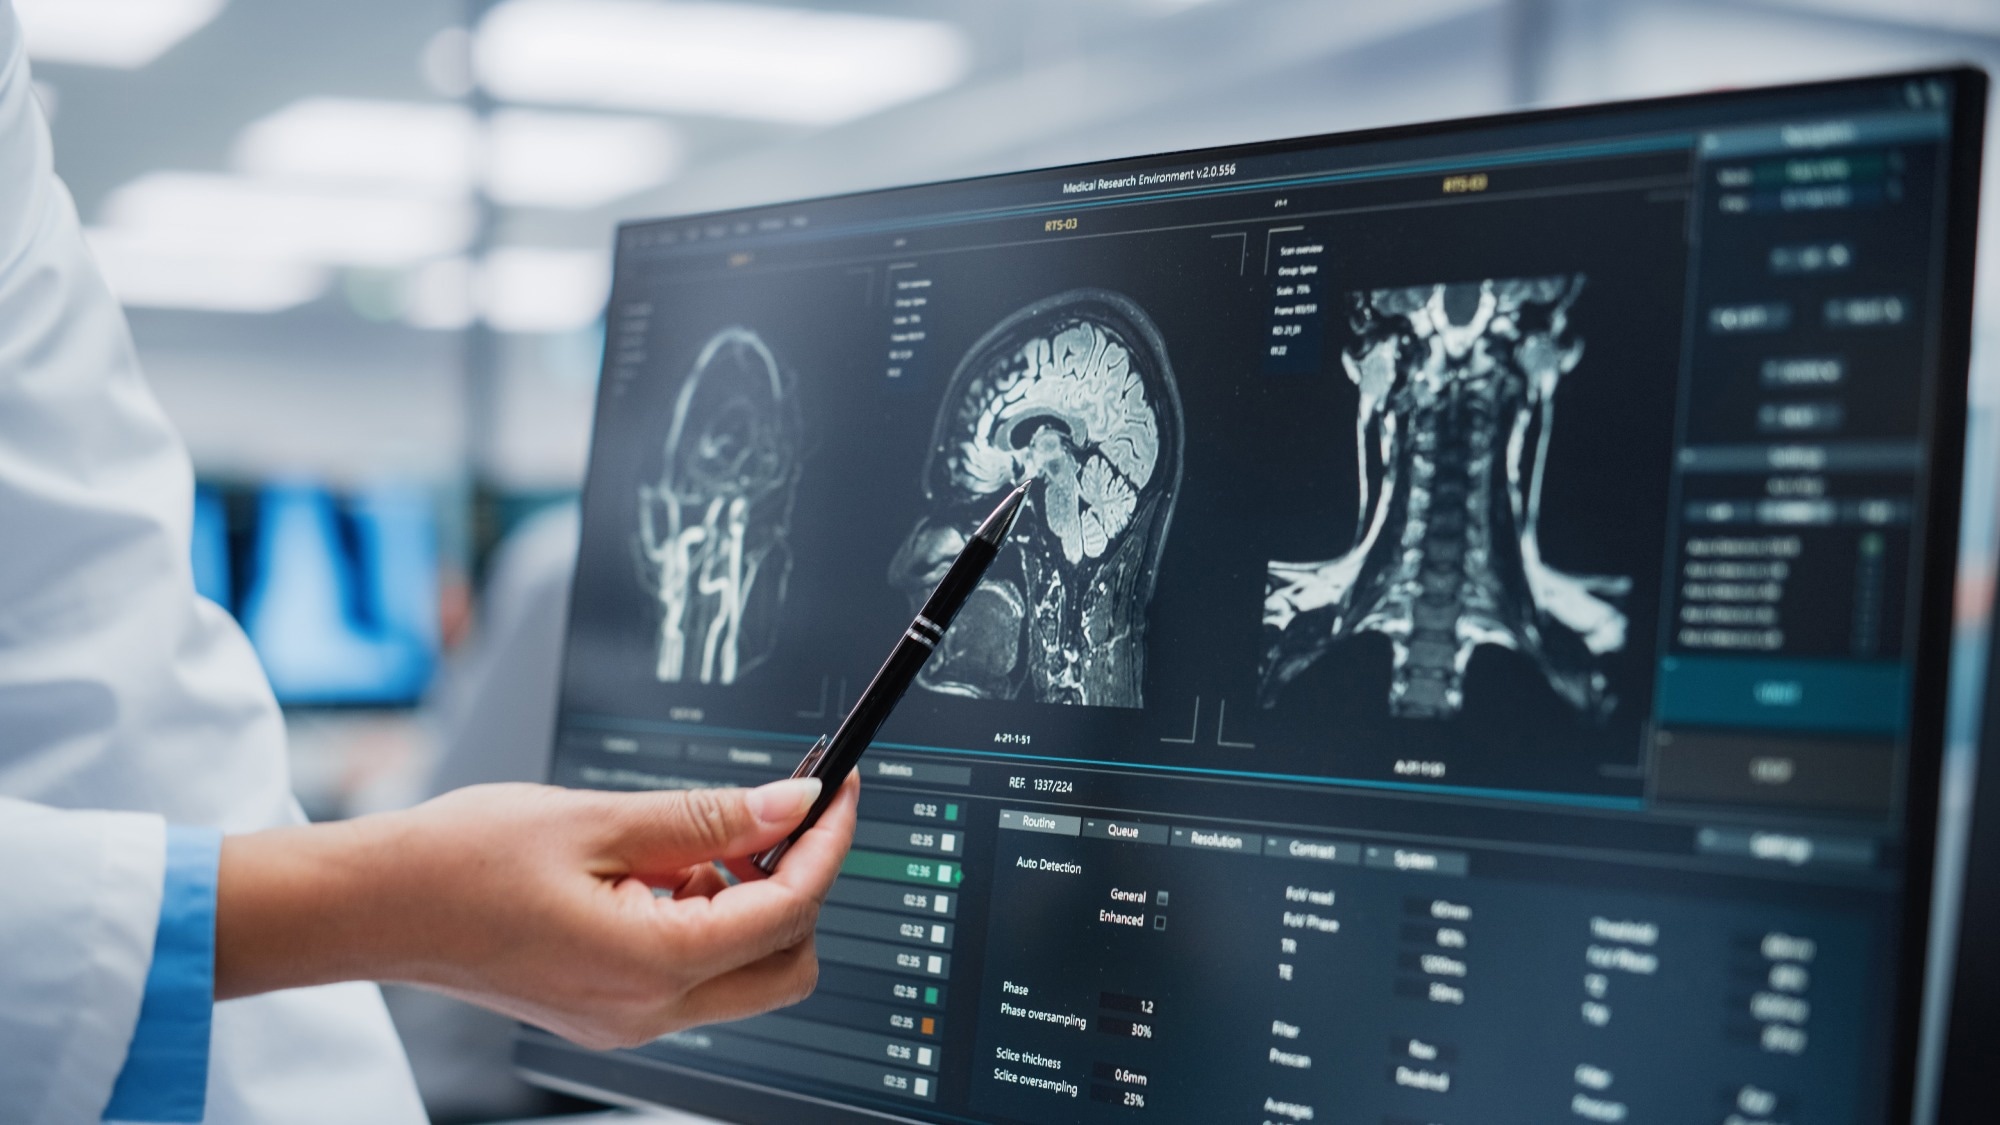 Study: Improving portable low-field MRI image quality through image-to-image translation using paired low- and high-field images. Image Credit: Gorodenkoff/Shutterstock.com